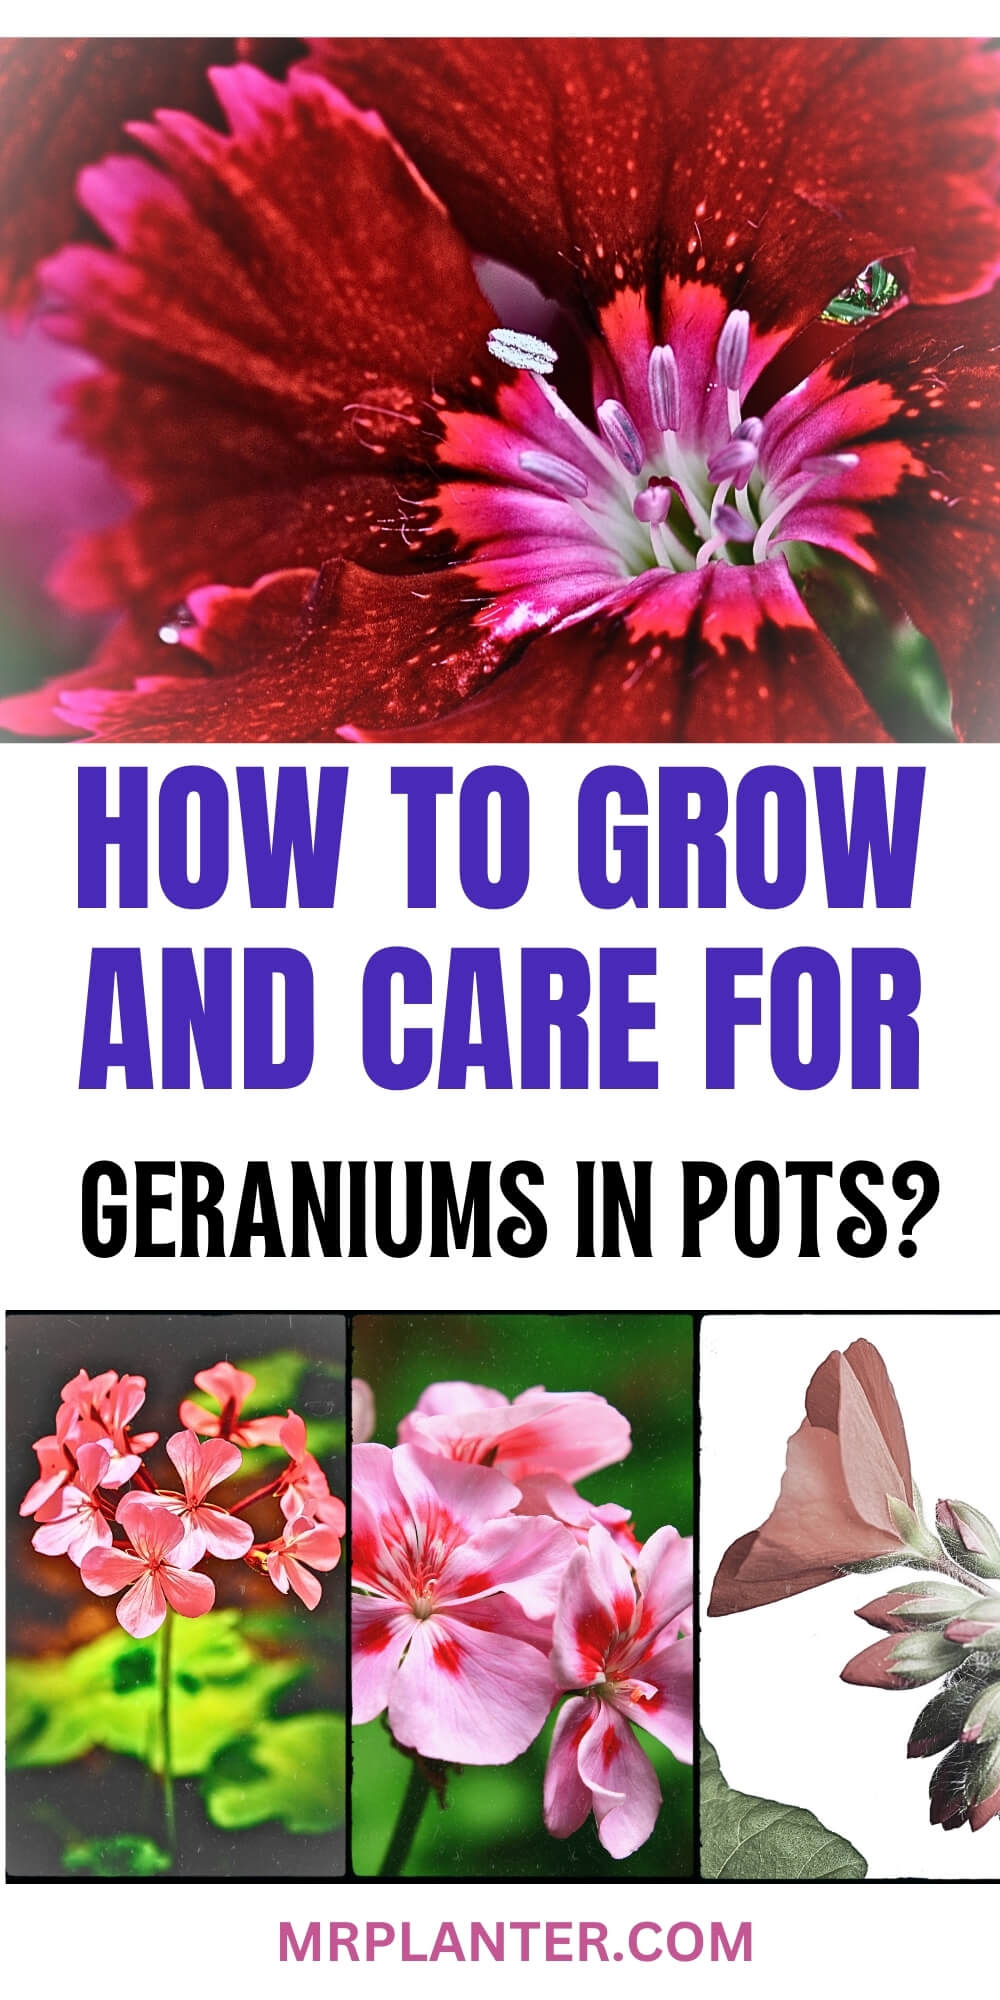 How to Grow and Care for Geraniums in Pots?